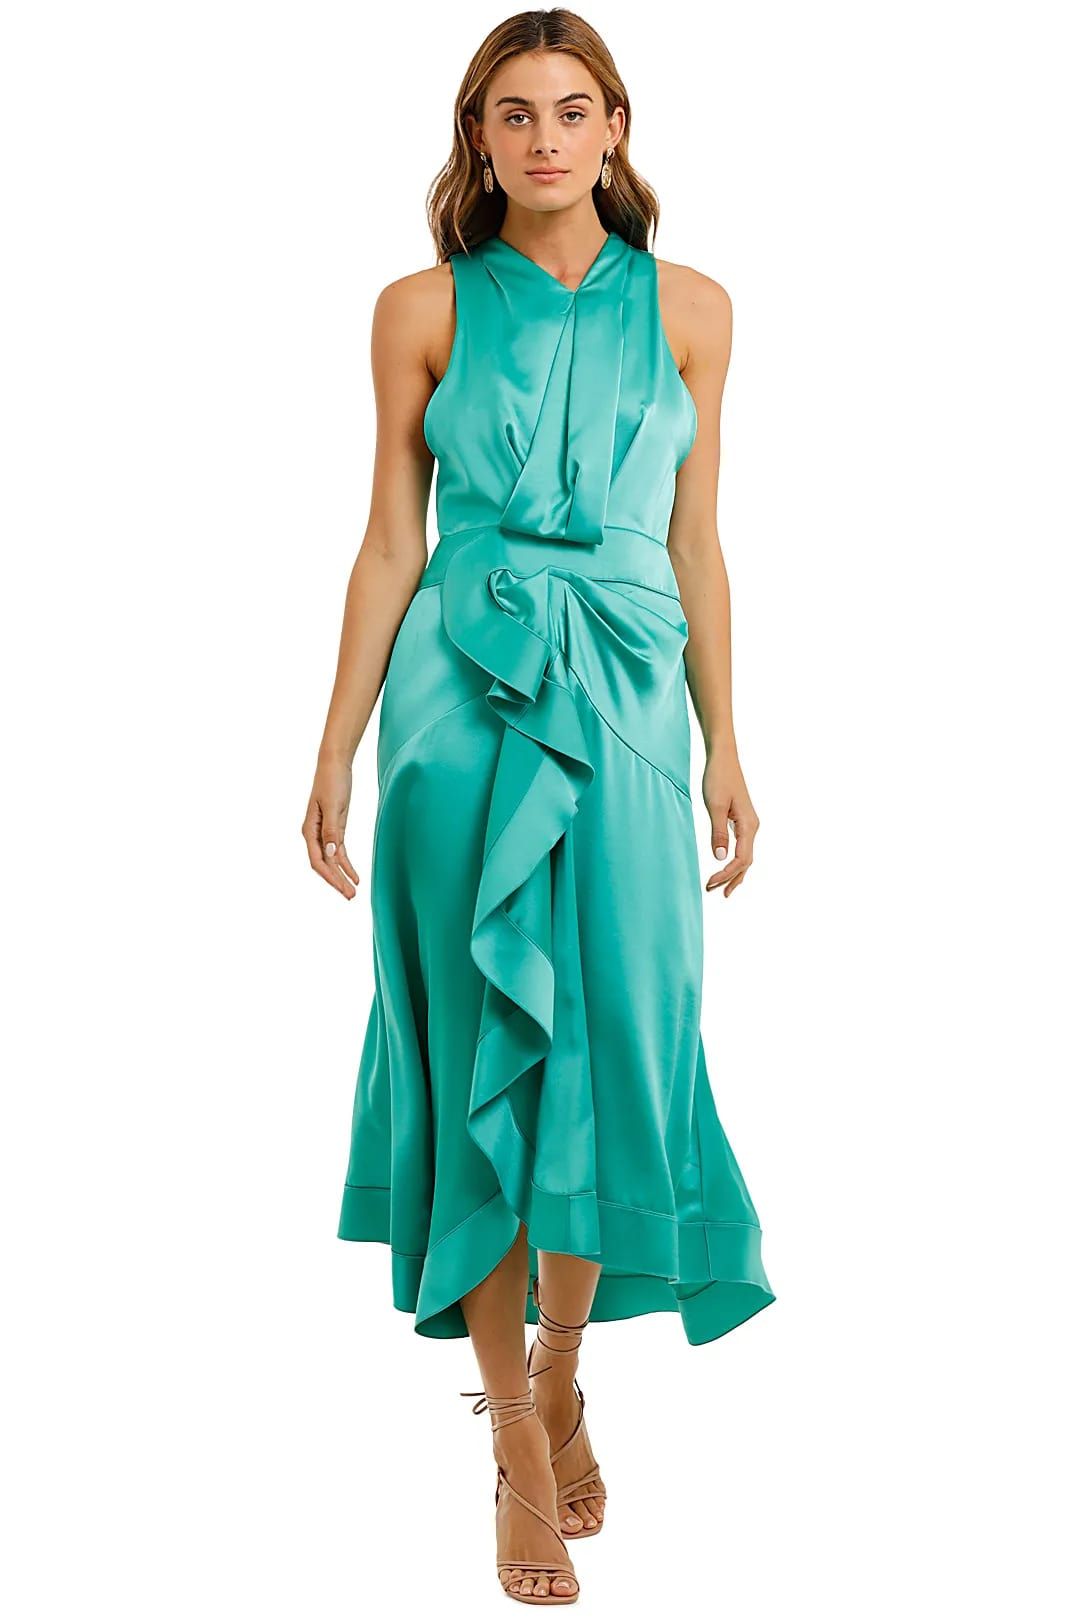 Hire Millbank dress in green for wedding guests.